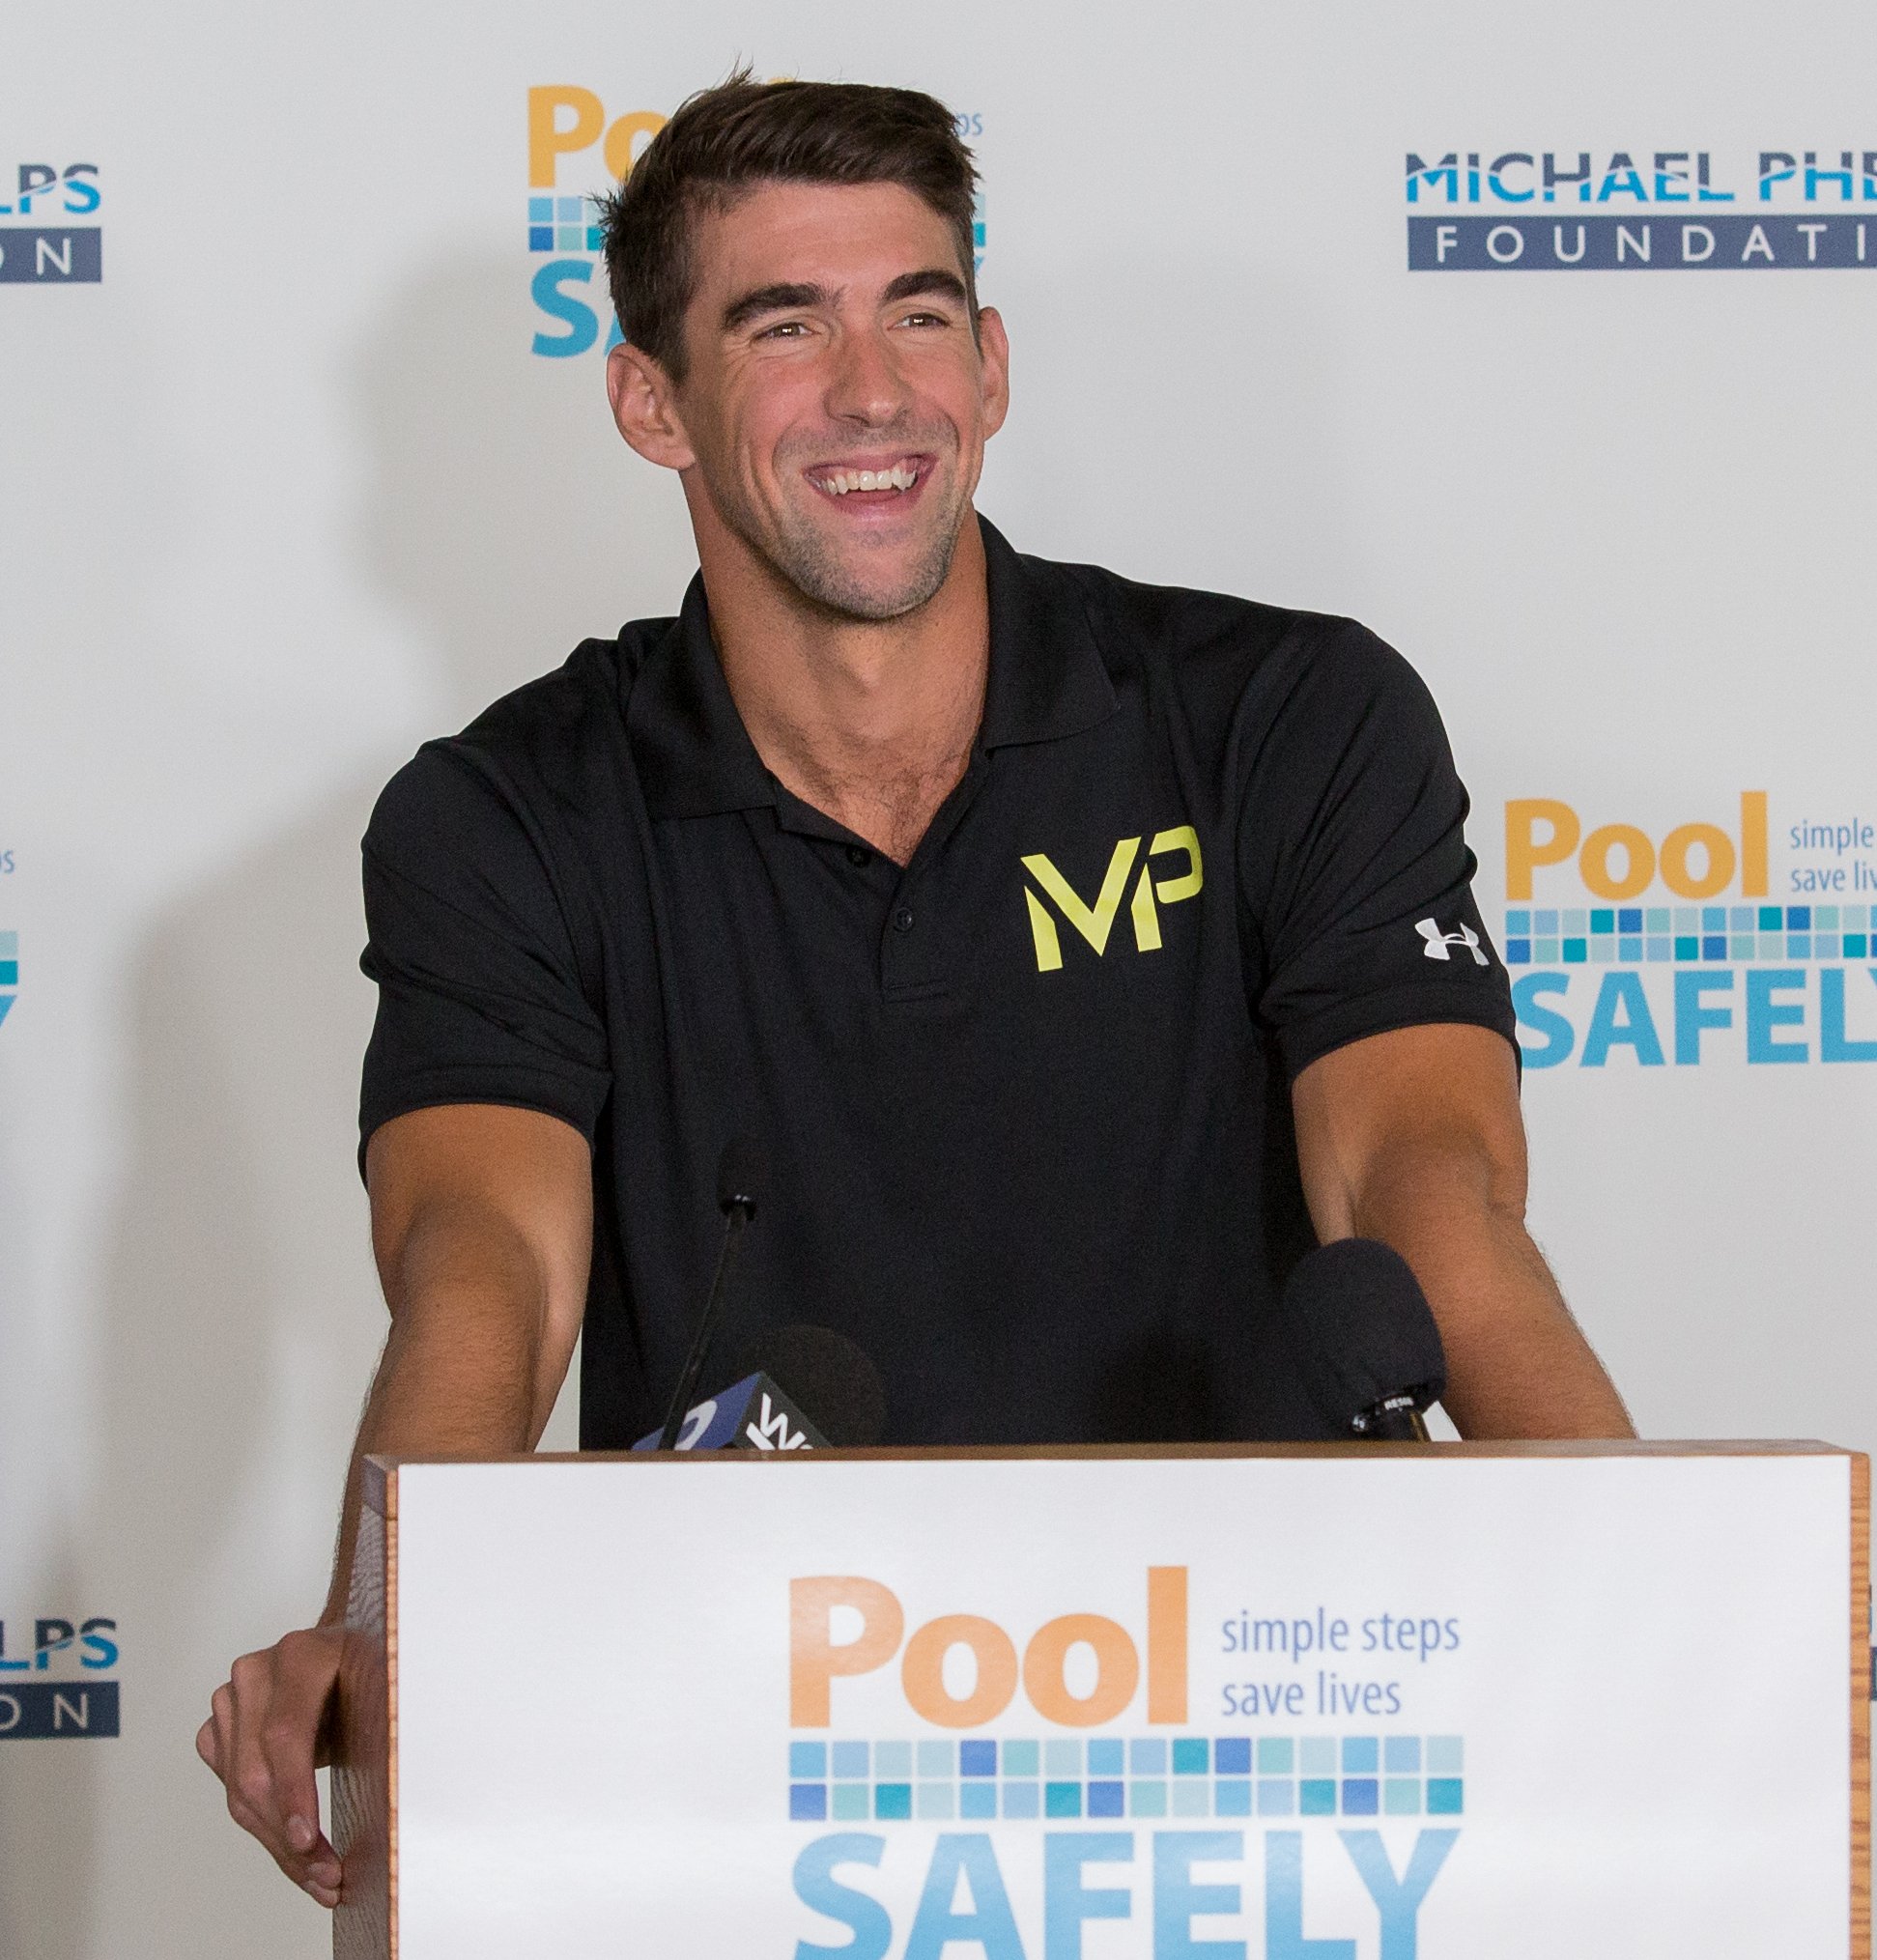 Michael Phelps and Michael Phelps Foundation l Photo : Wikimedia Commons/ Creative Commons Attribution 2.0 Generic